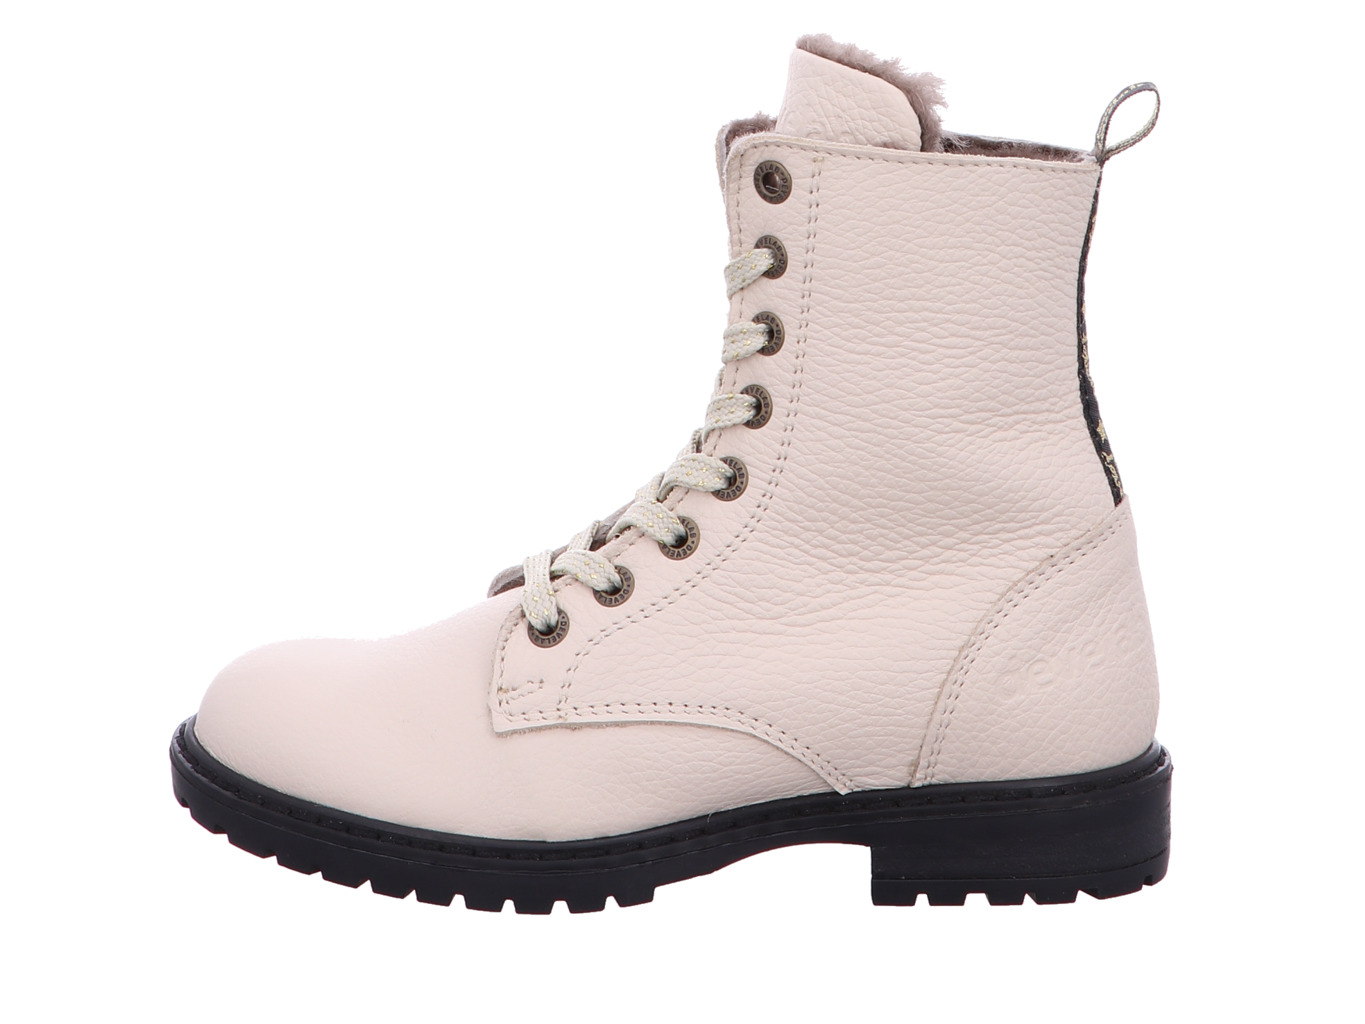 develab_girls_mid_boot_laces_42846_222_3167